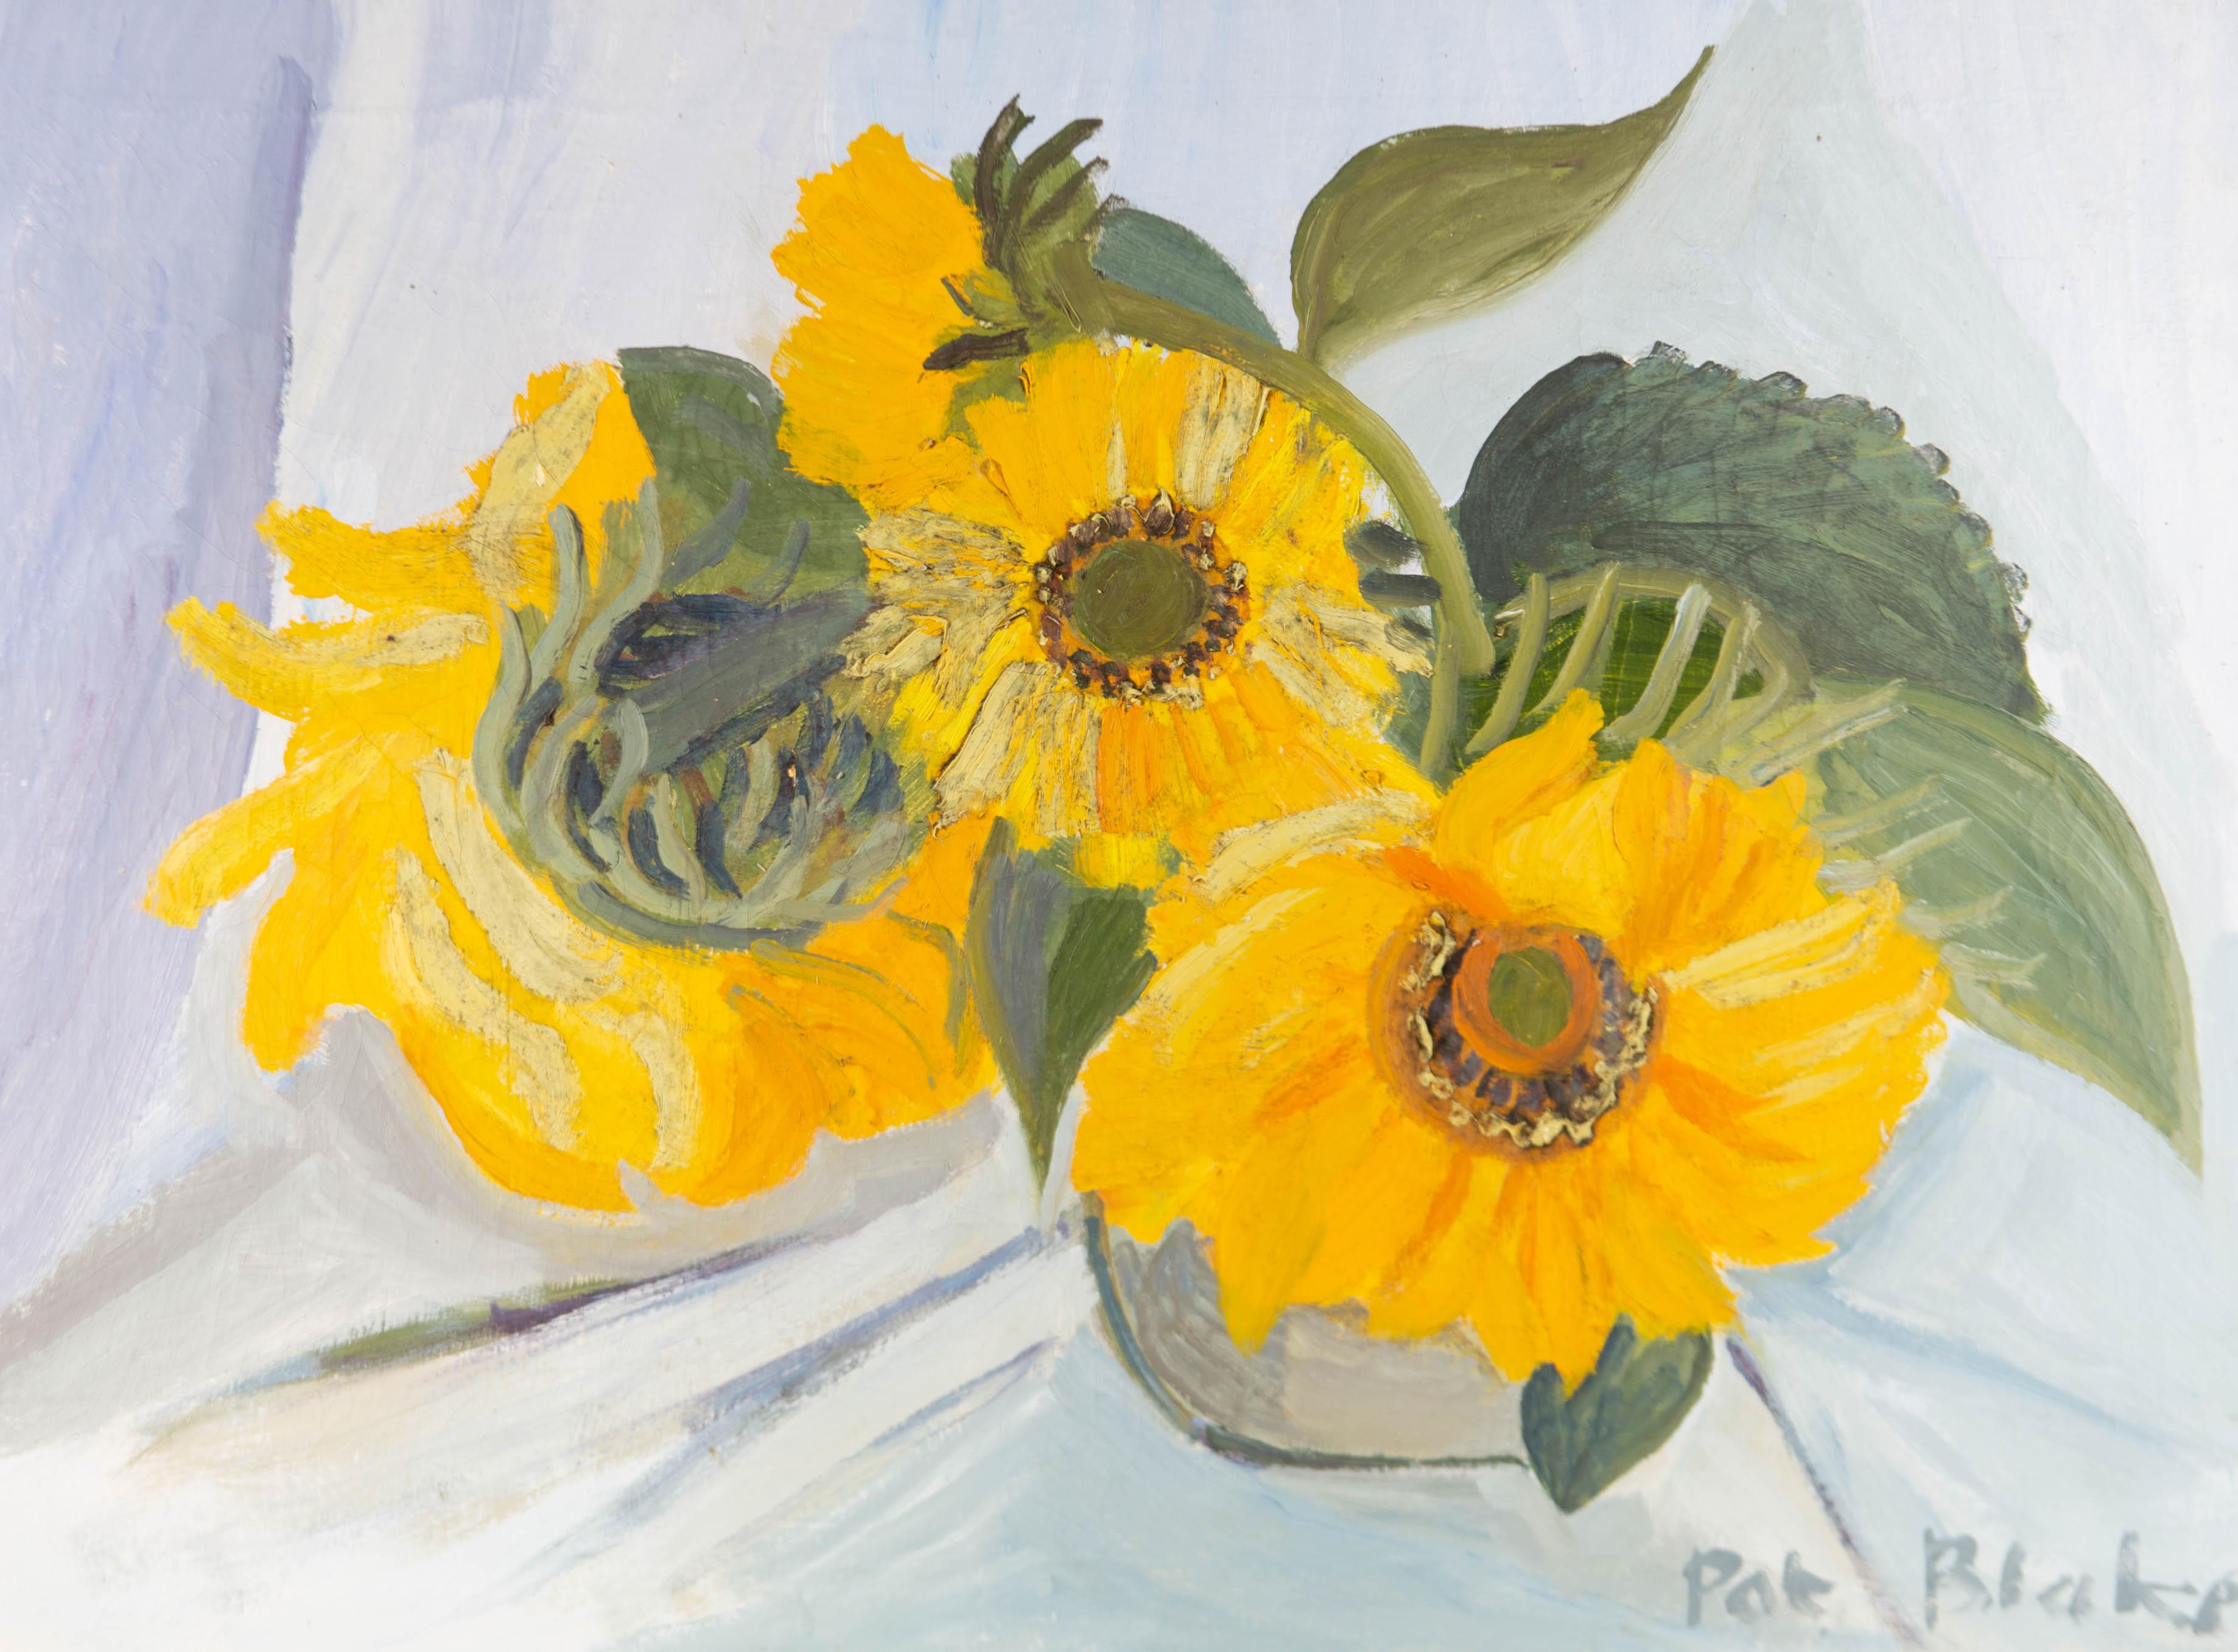 Pat Blake - 20th Century Oil, Still Life of Sunflowers - Painting by Unknown